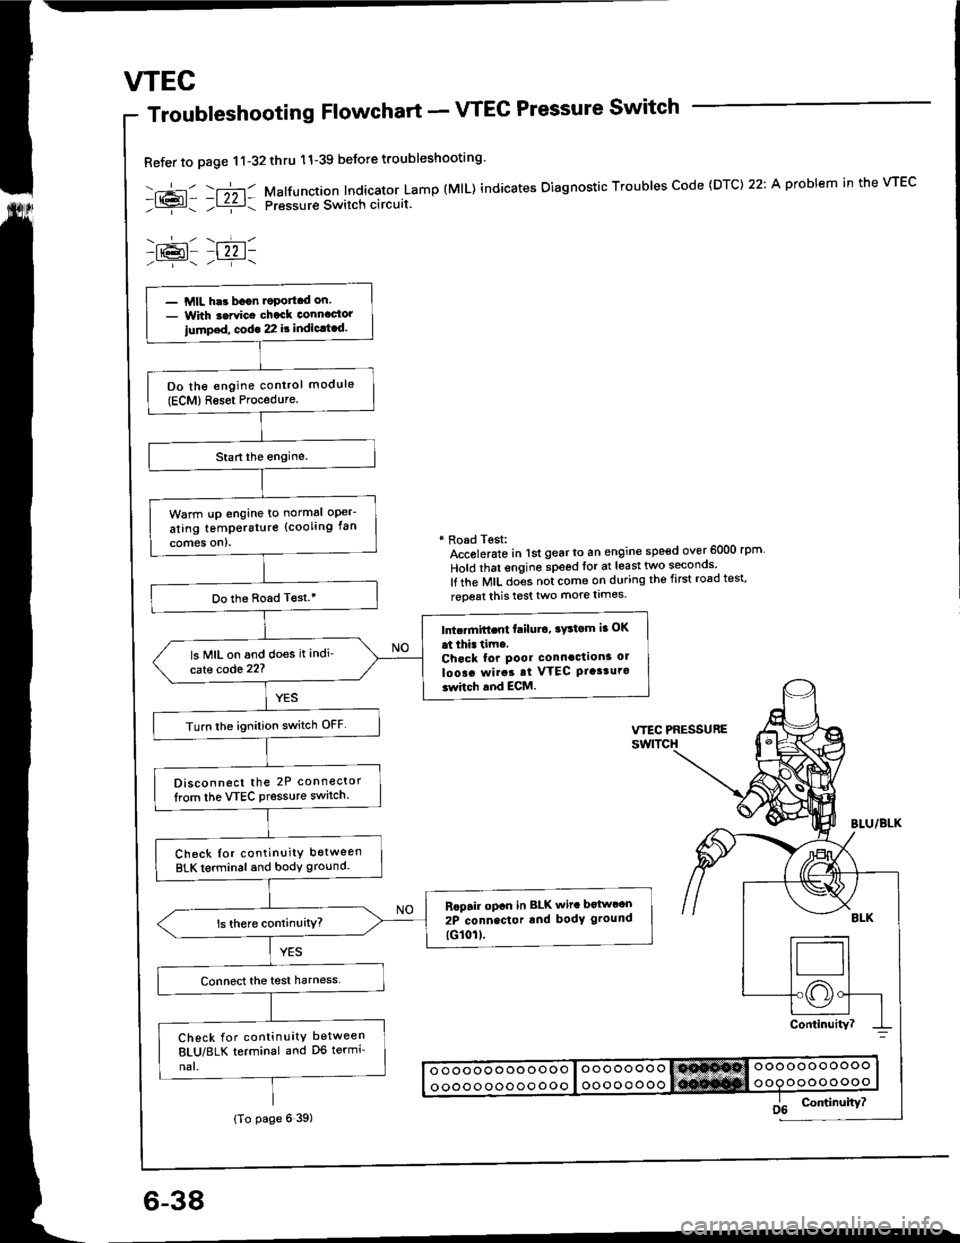 ACURA INTEGRA 1994  Service Repair Manual wEc
6-38
Troubleshooting Flowchart - VTEC Pressure Switch
Refer to page 11-32thru 11-39 beJore troubleshooting
-.+- -r";-r- Malfunction Indicator Lamp (MlL) indicates Oiagnostic Troubles Code (DTC) 2